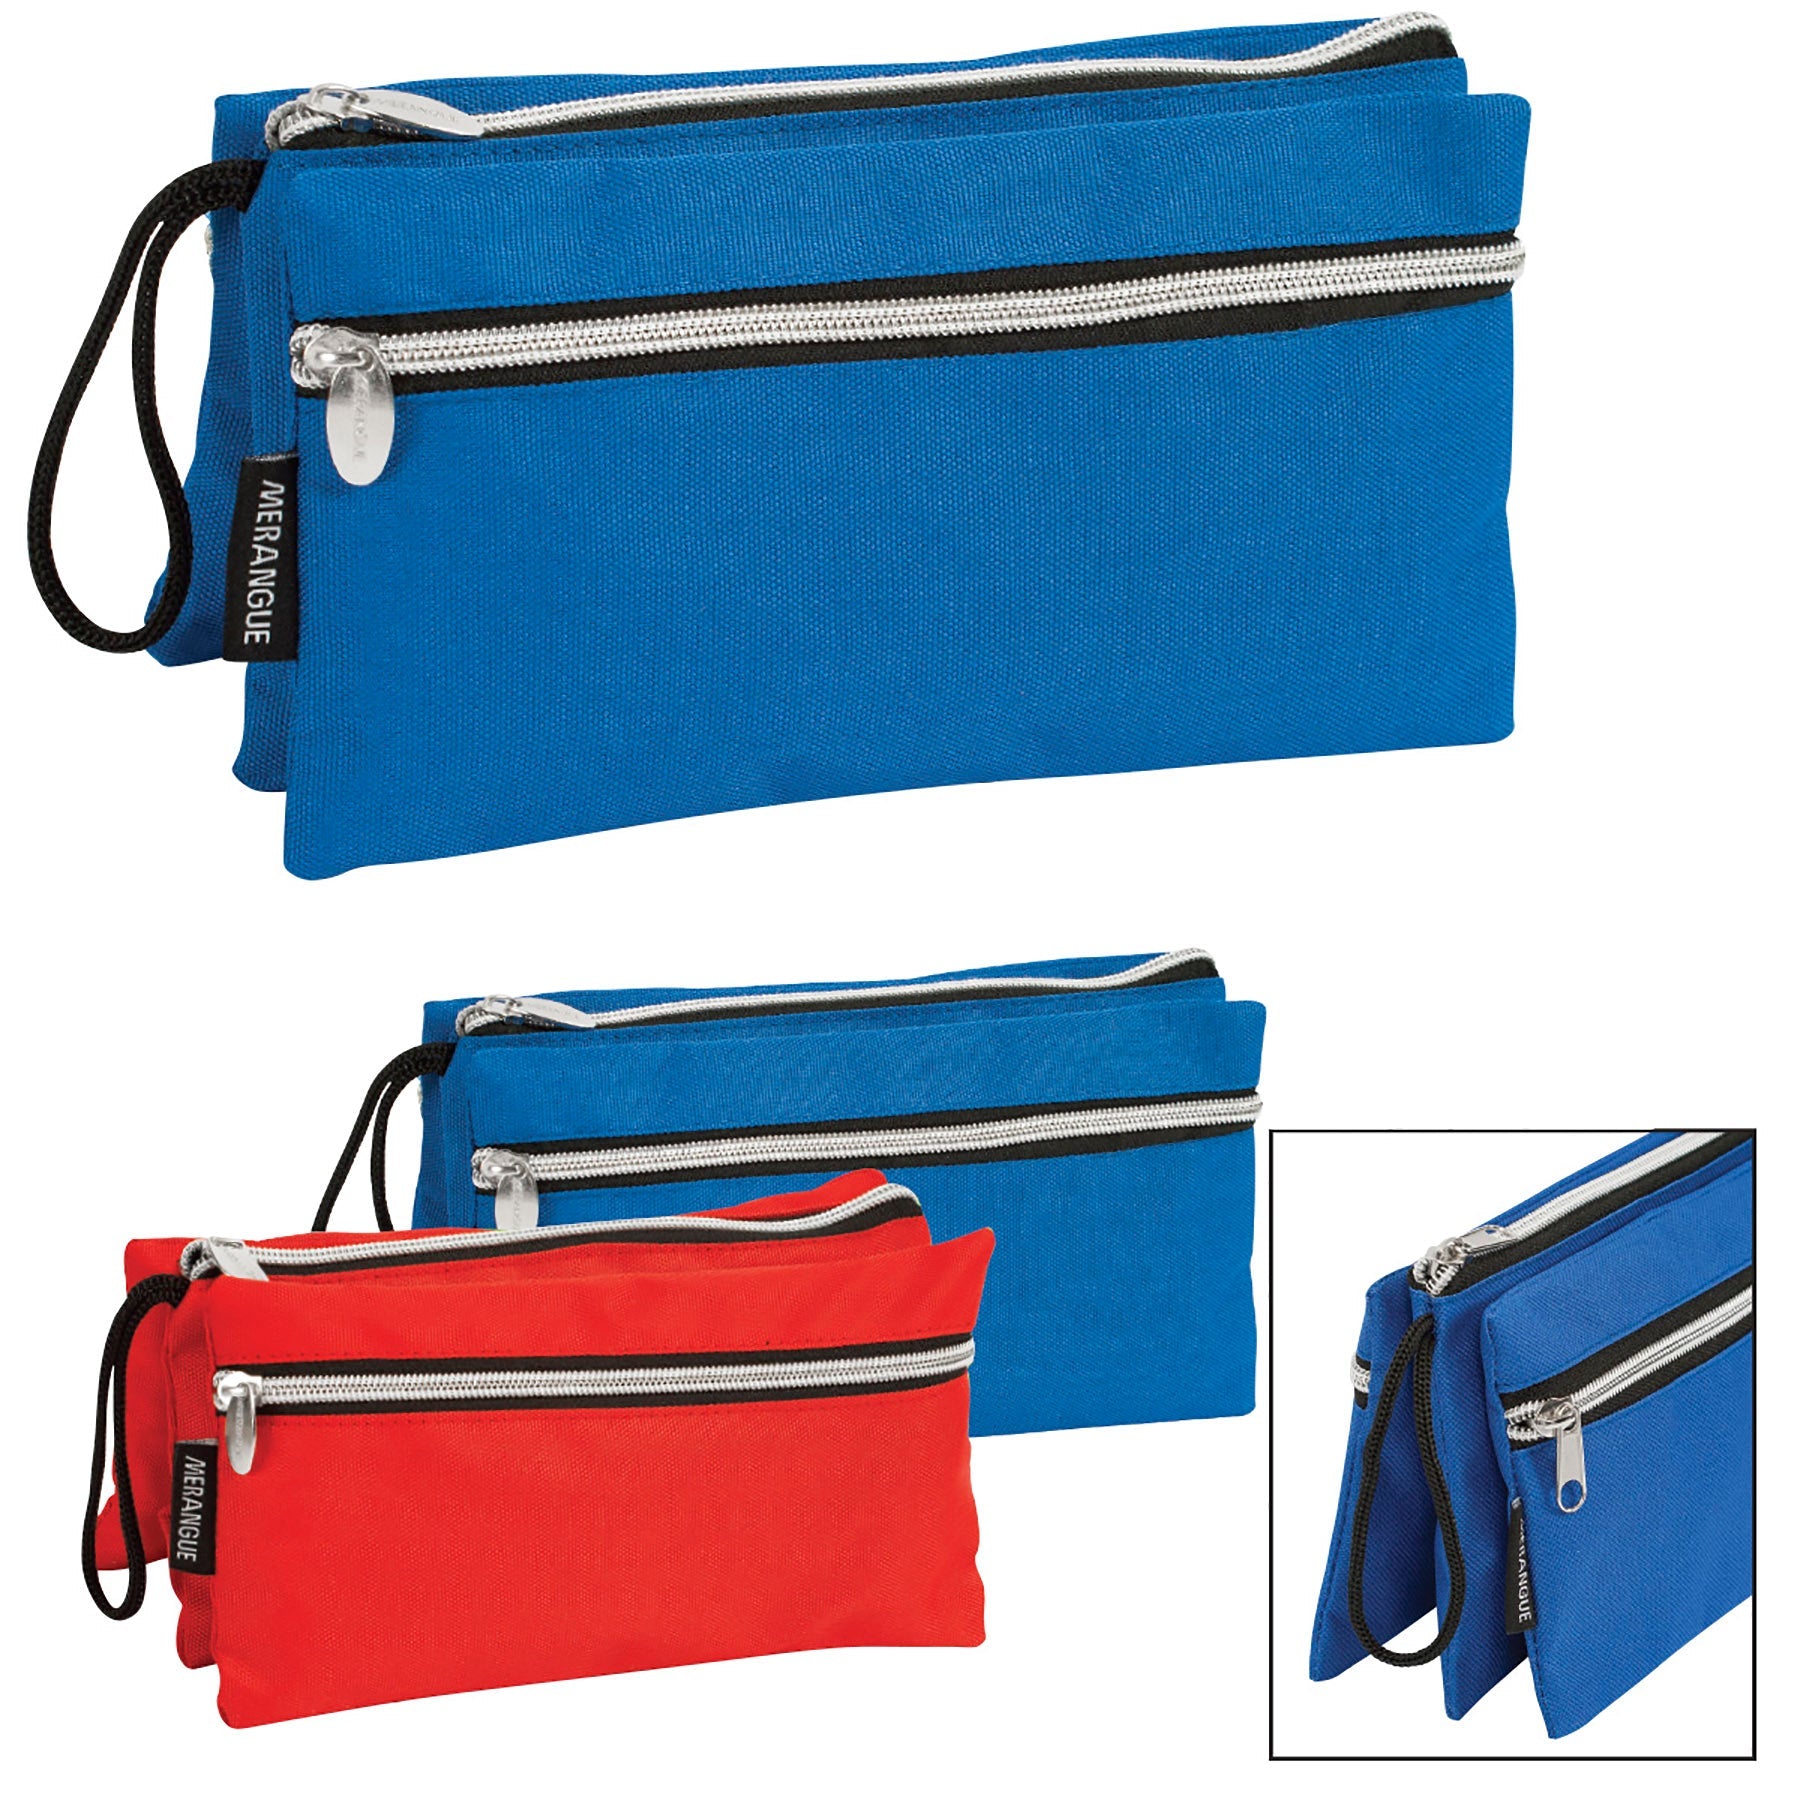 Merangue Pencil Case with 3 Compartments 8.75x5x1in